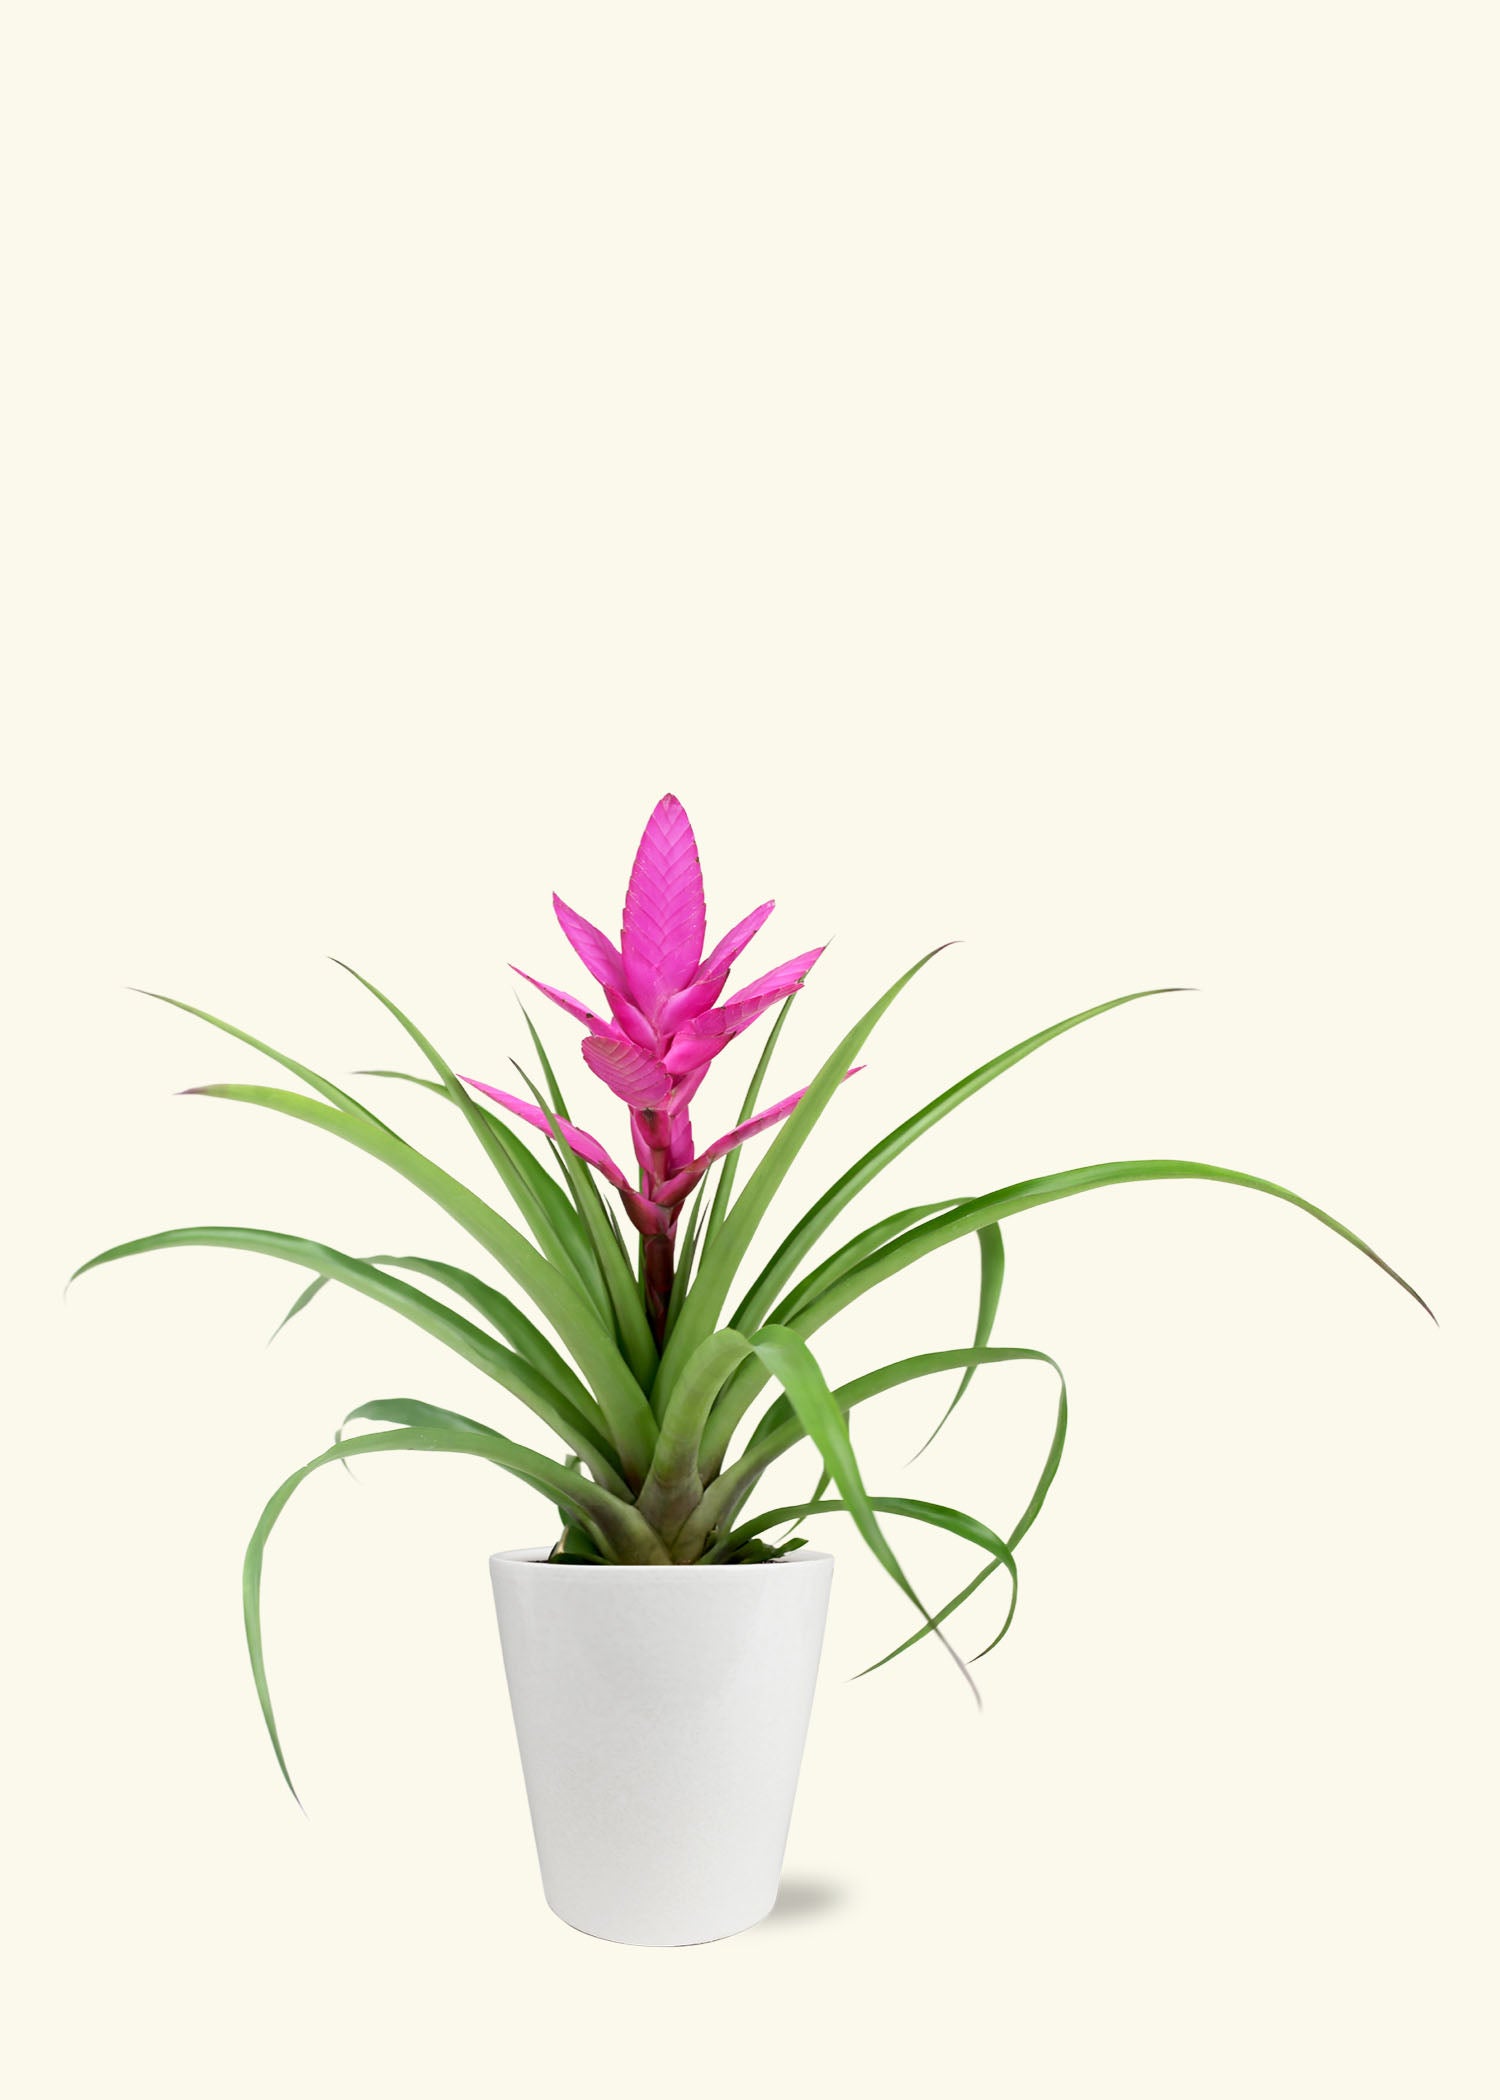 Small Pink Bromeliad in a white quinn ceramic grow pot.